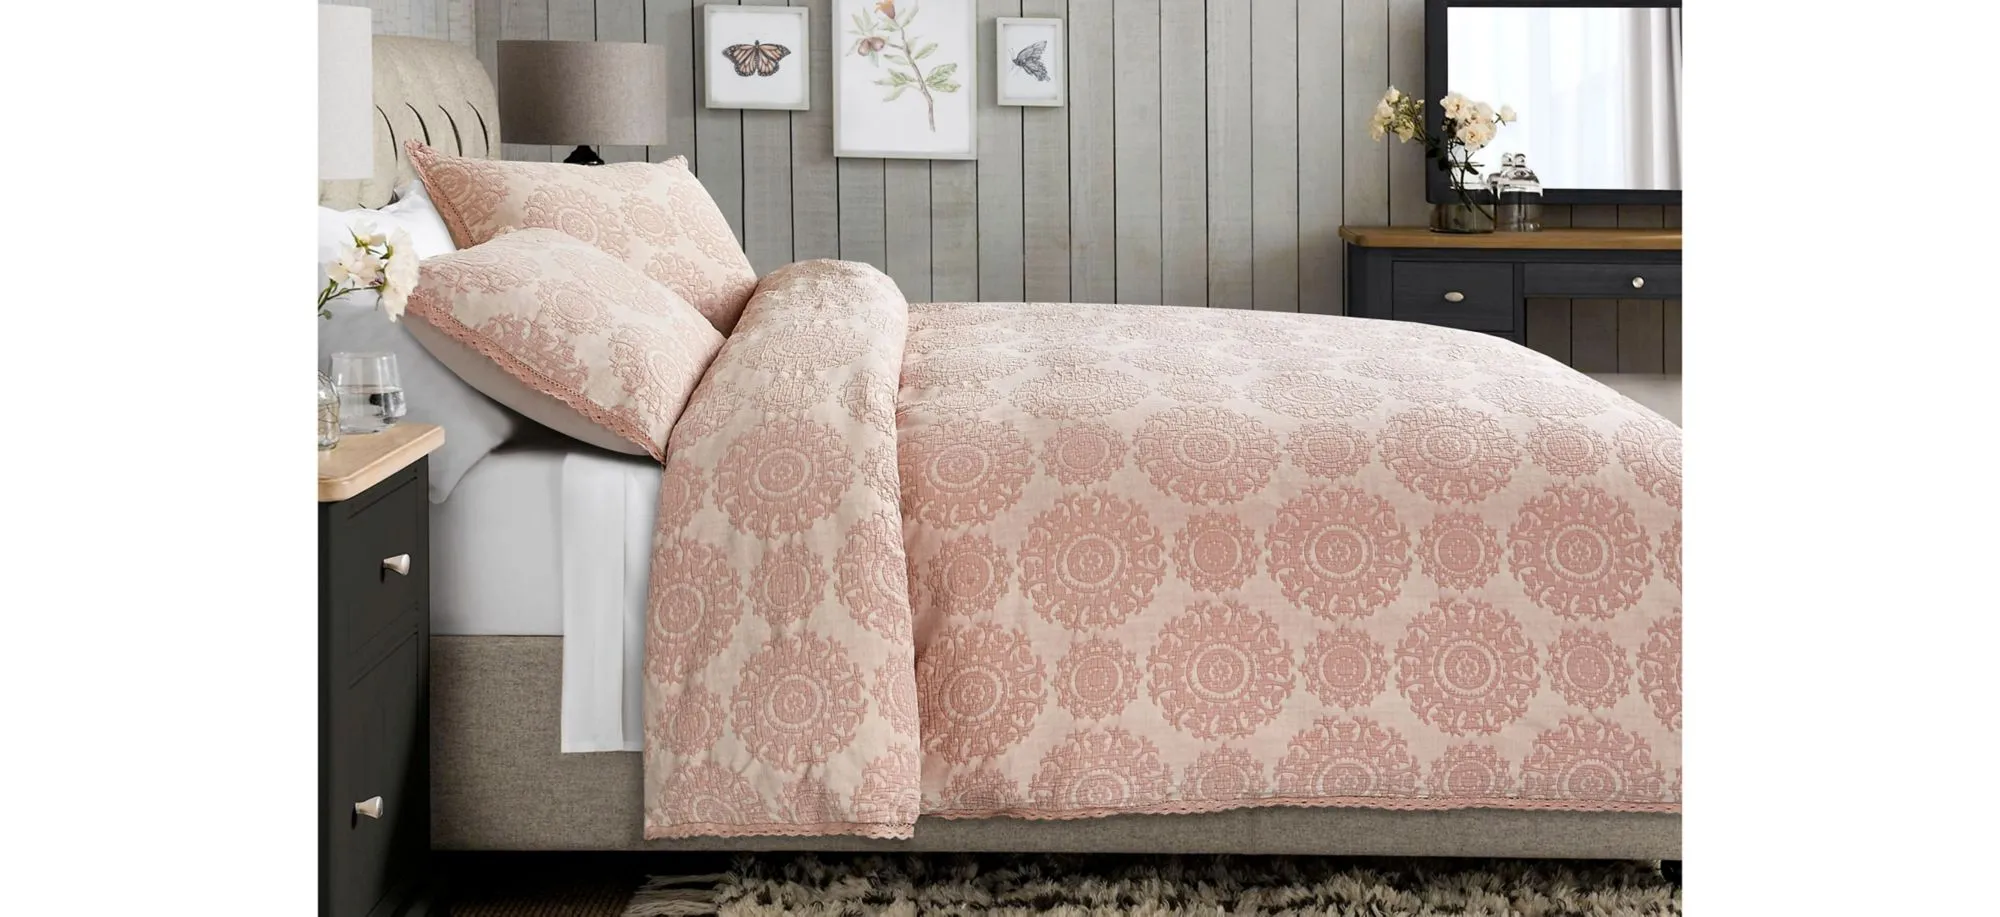 McKinley 3-Pc. Duvet Set in Pink by Amini Innovation